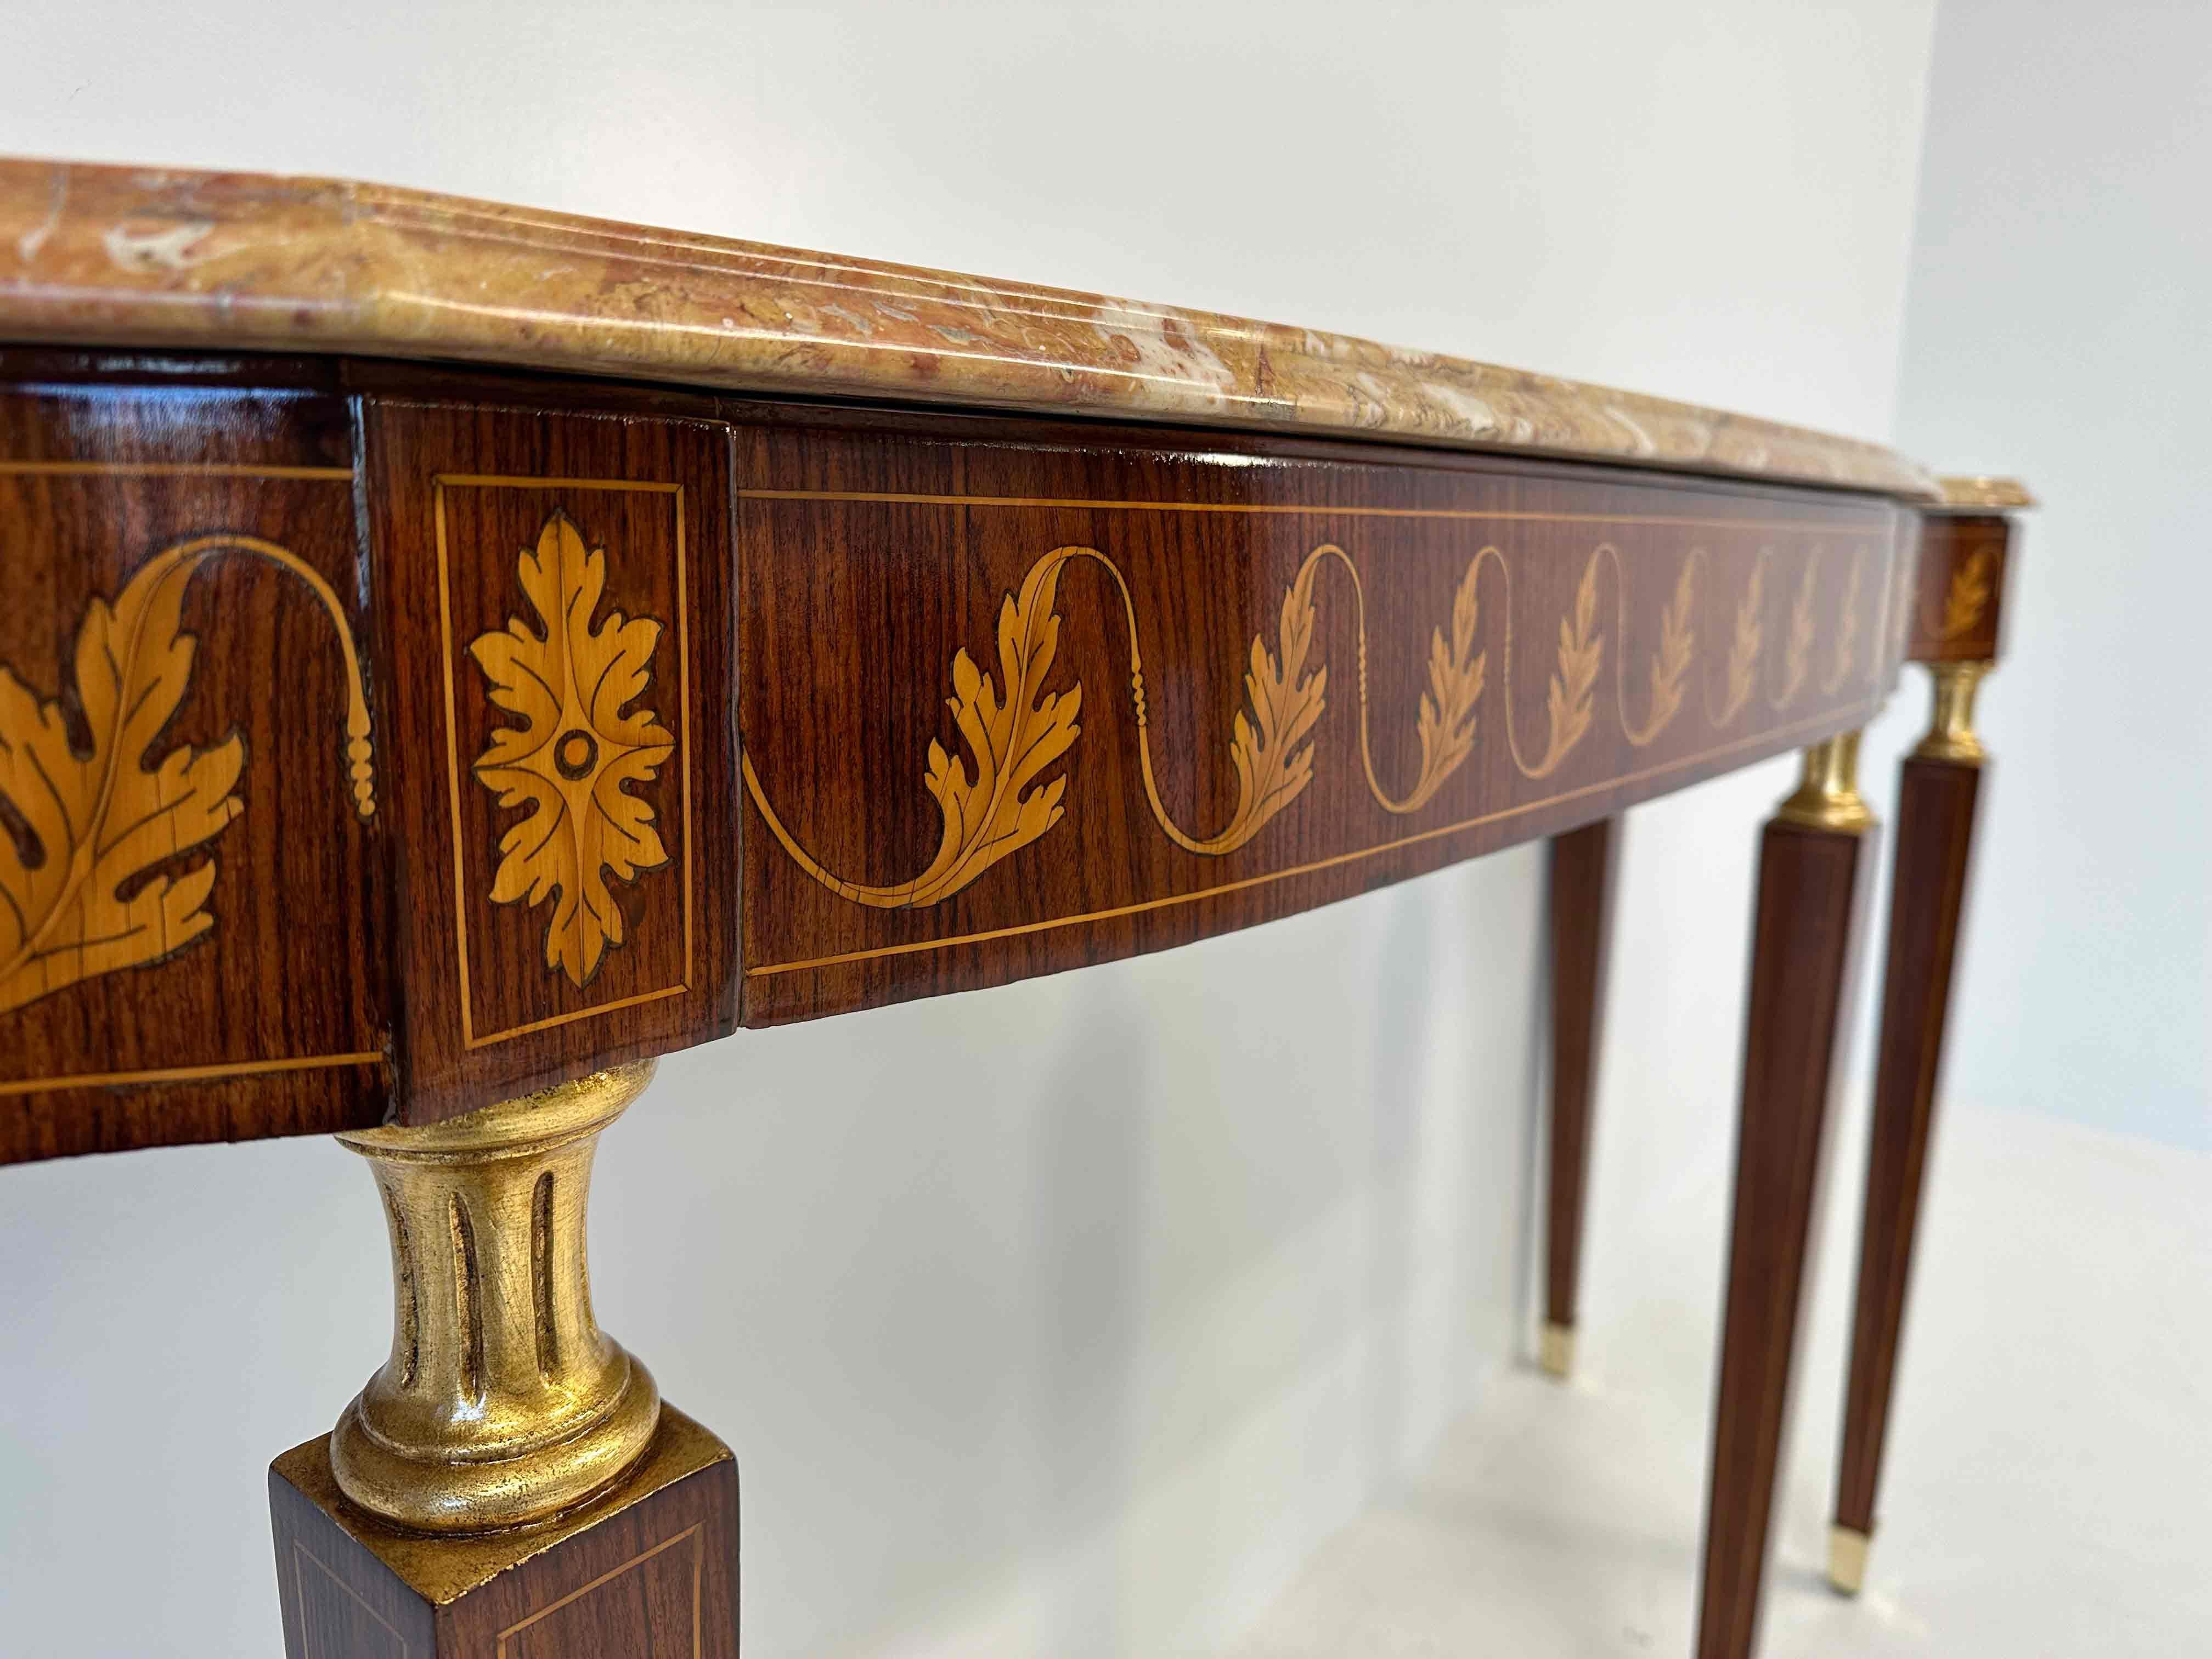 Italian Art Deco Marble and Inlaid Wood Console, Attr. to Paolo Buffa, 1950s For Sale 7